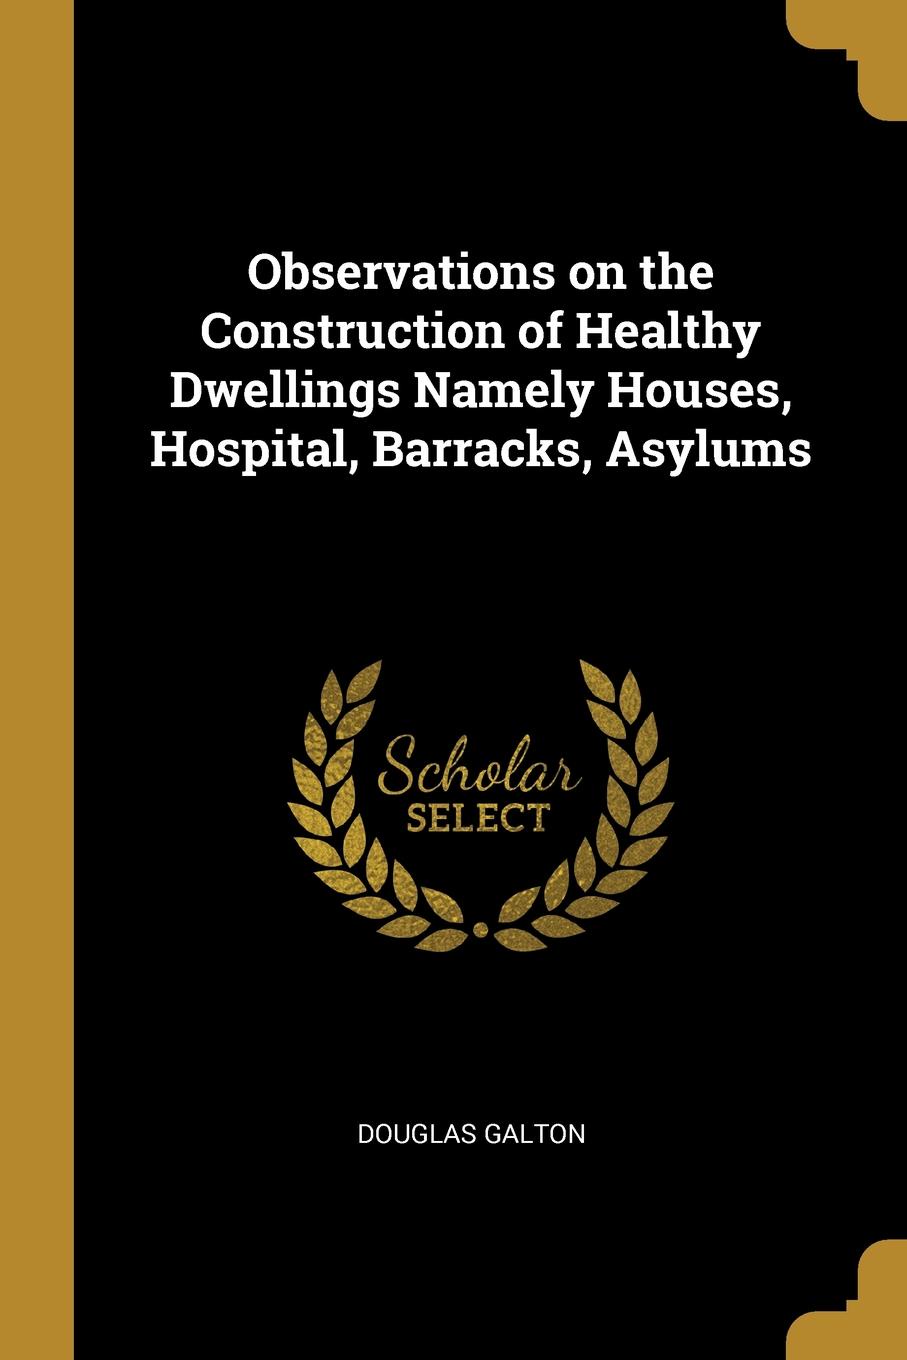 Observations on the Construction of Healthy Dwellings Namely Houses, Hospital, Barracks, Asylums